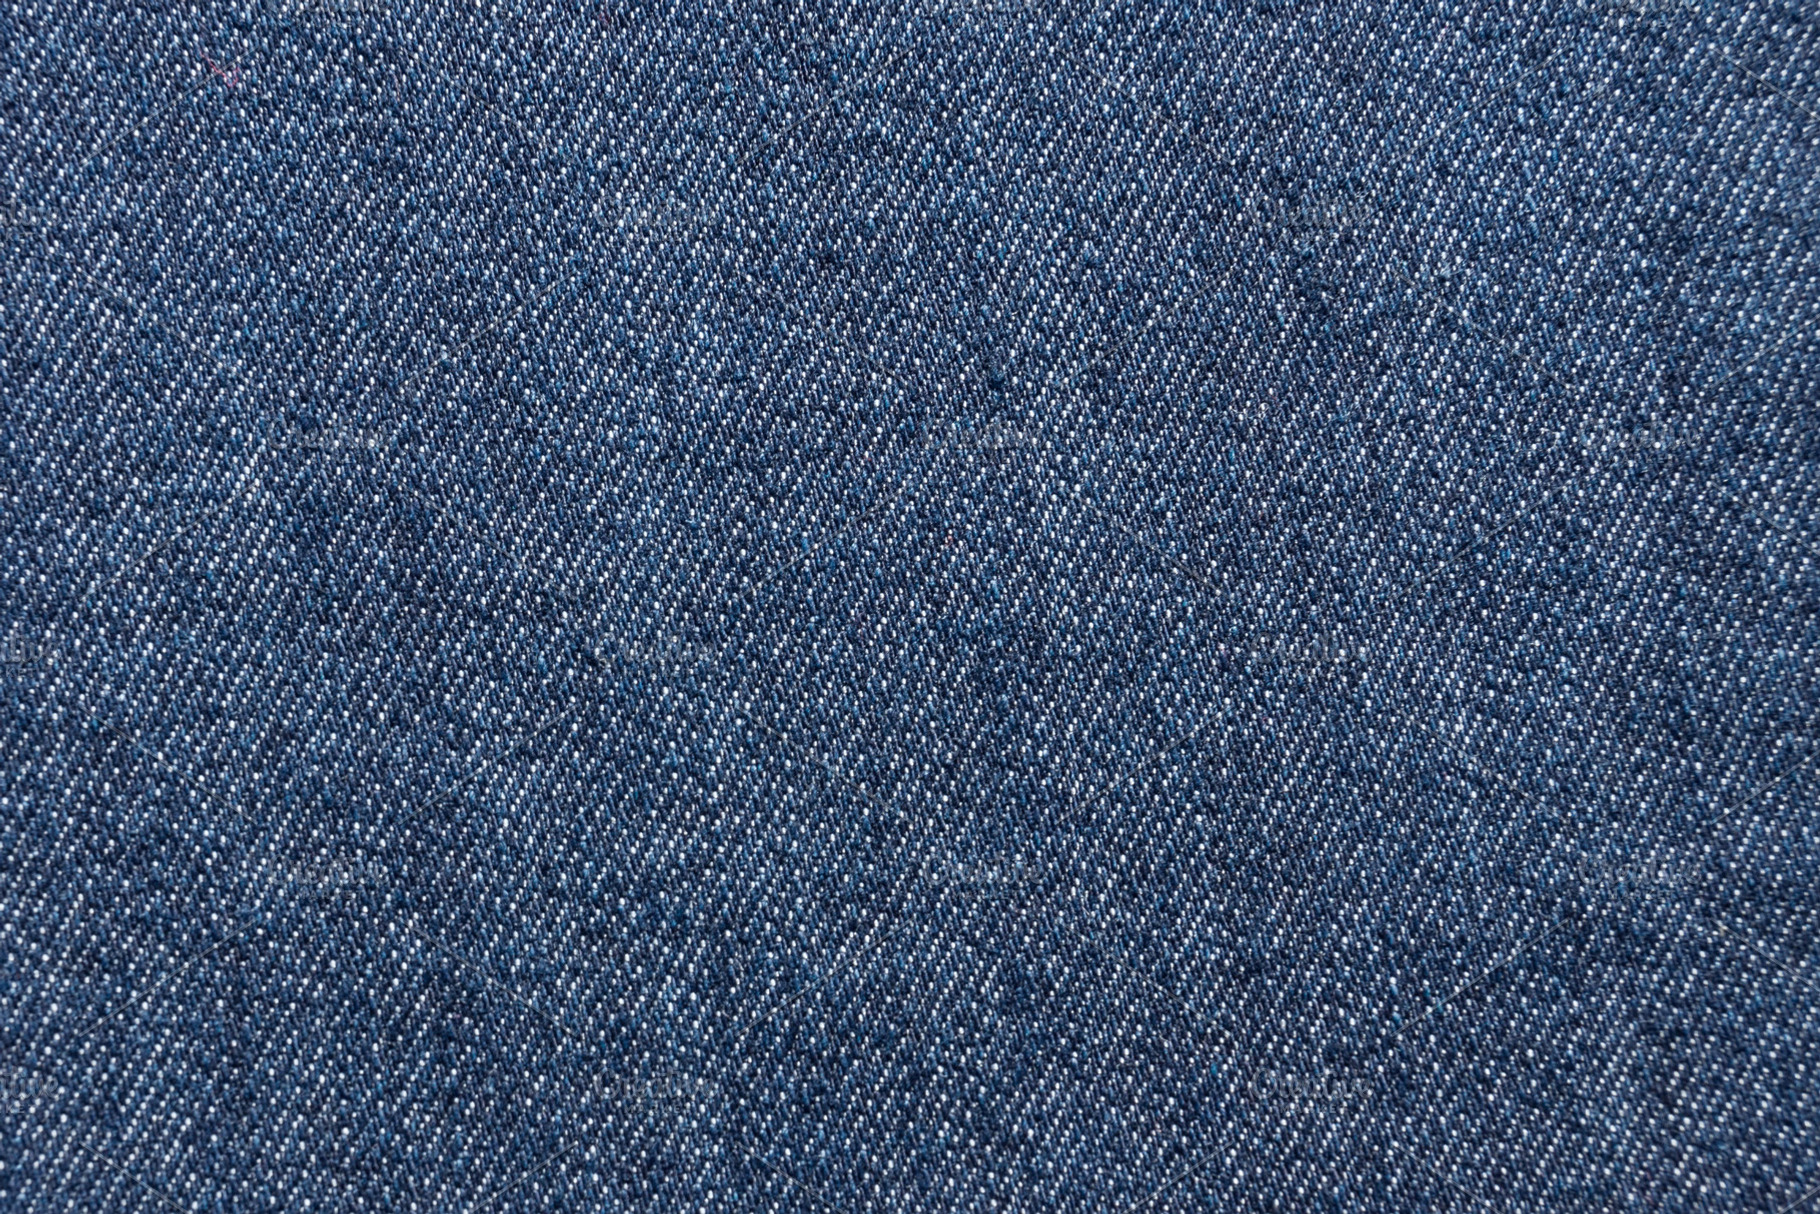 Jeans background | High-Quality Abstract Stock Photos ~ Creative Market